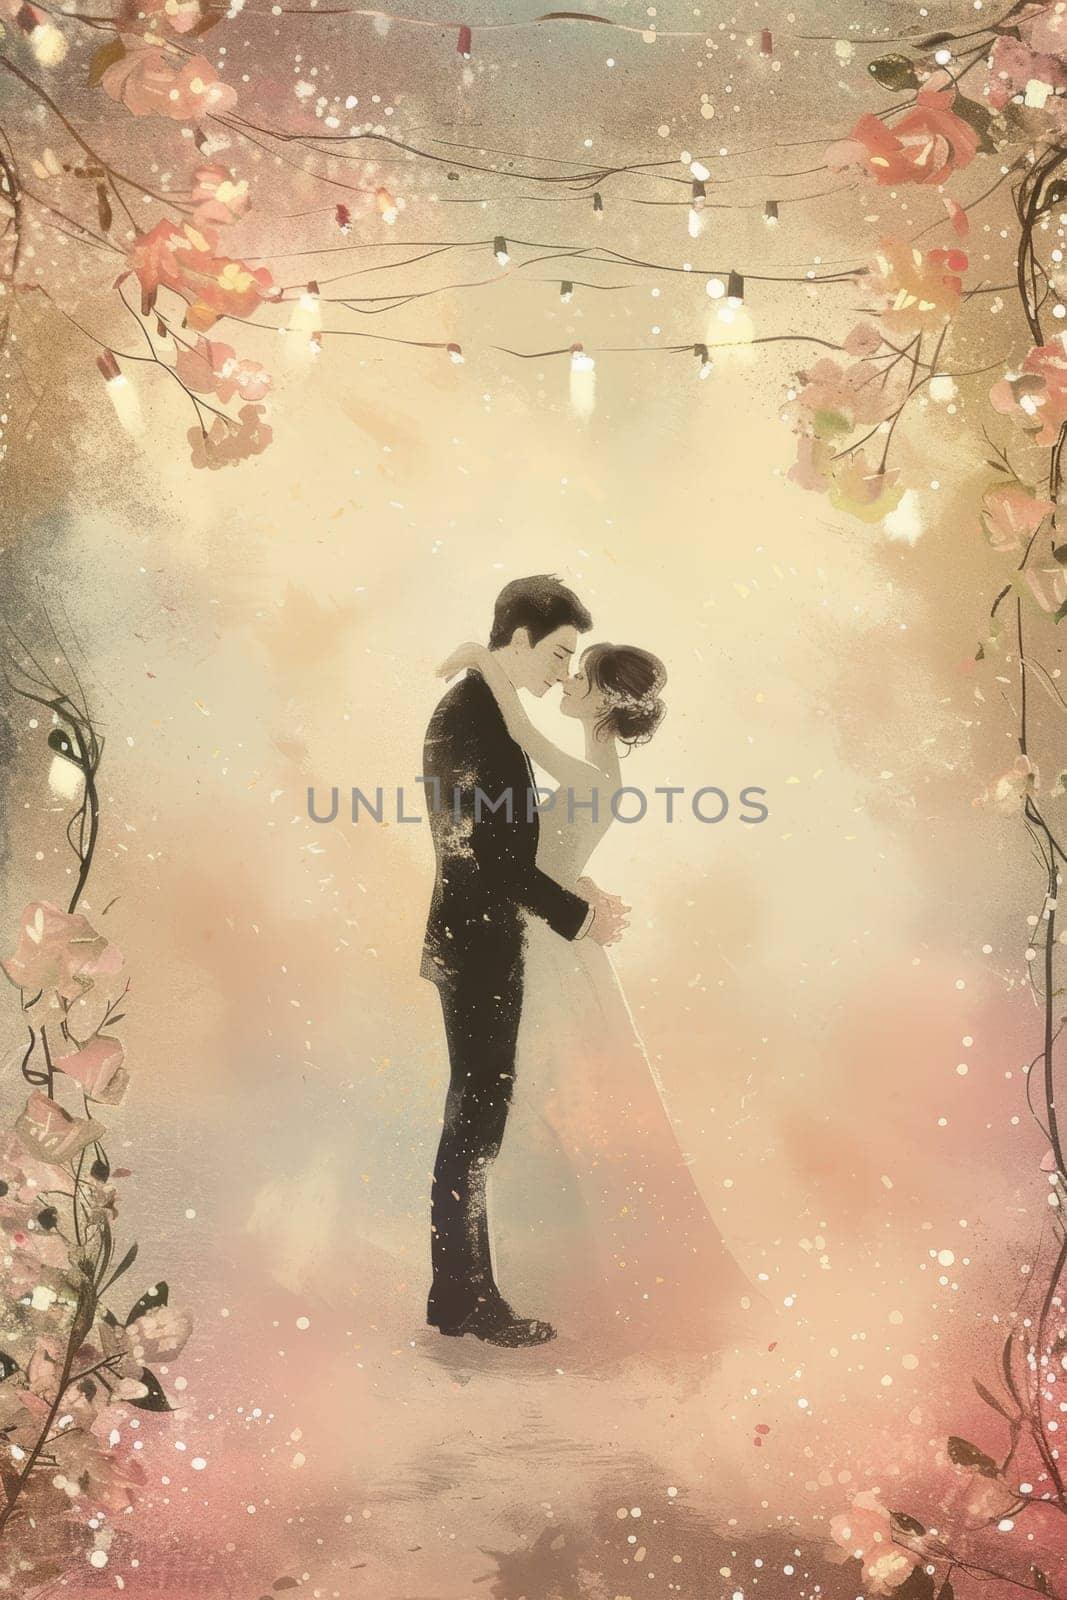 Illustration of an enchanted embrace between a couple surrounded by a floral fantasy